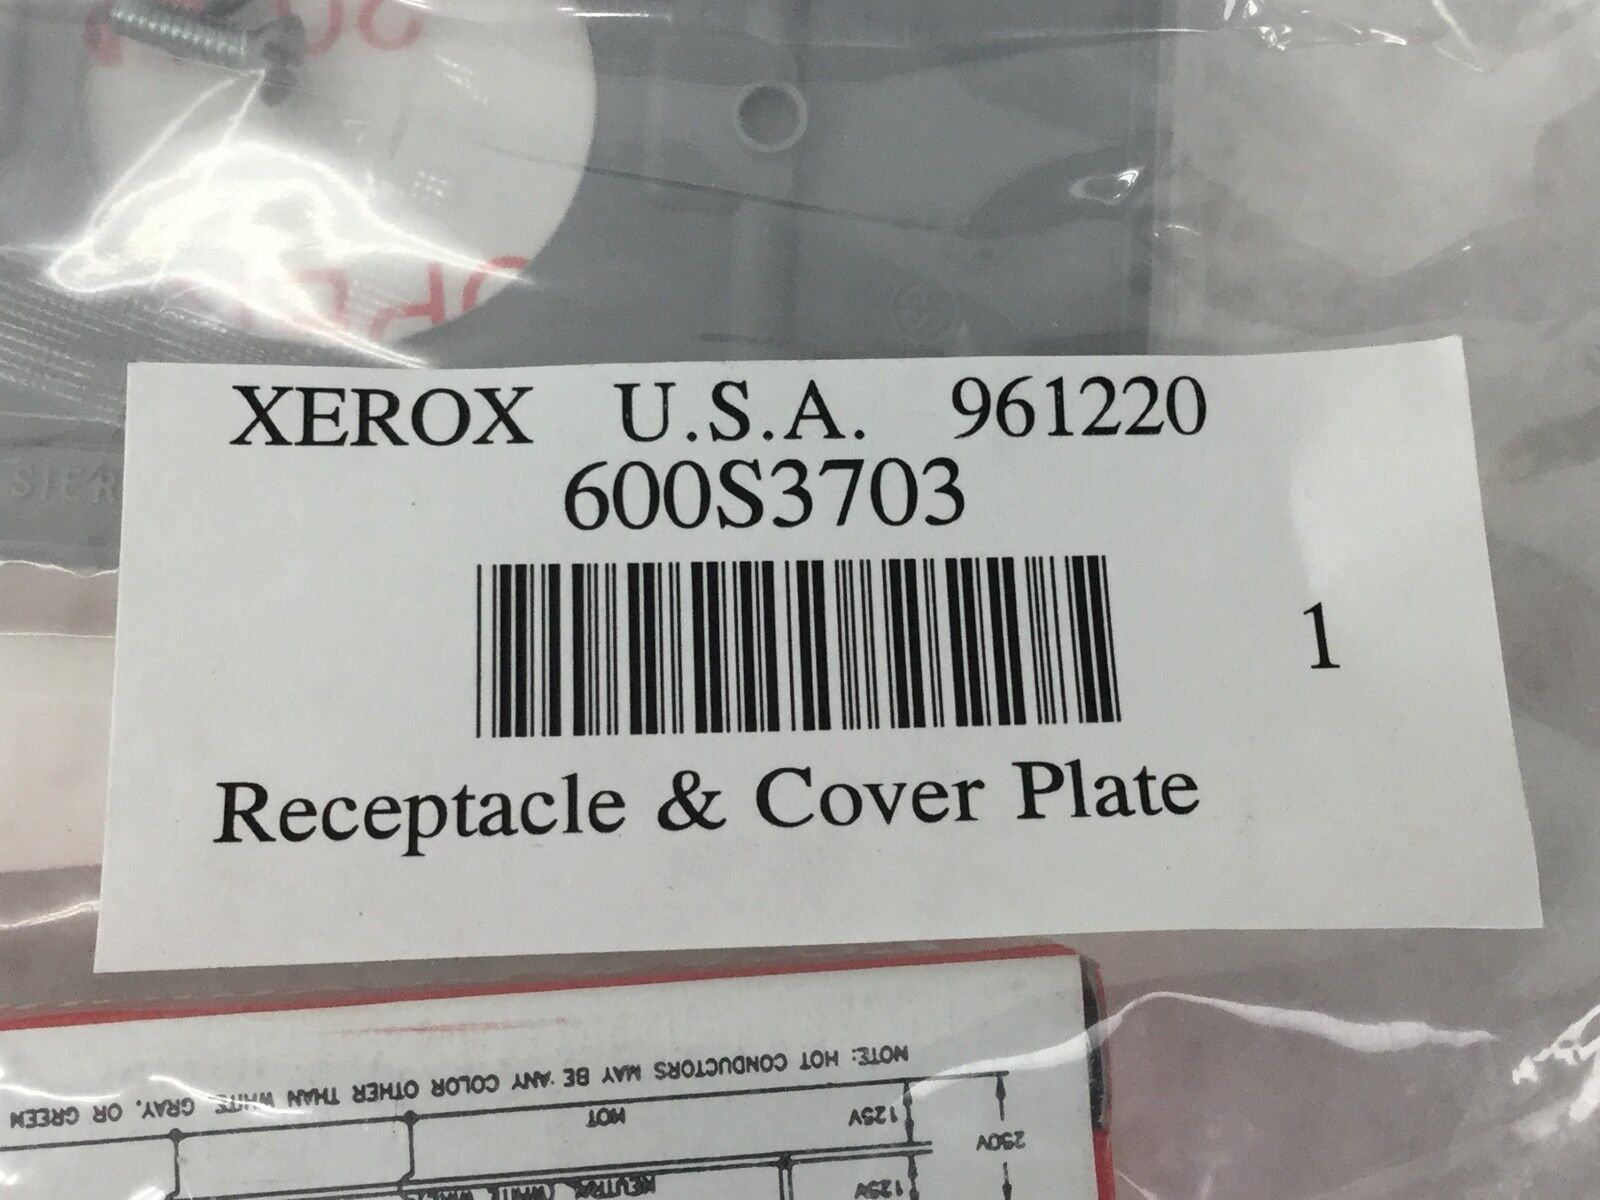 XEROX 600S3703 Receptacle & Cover Plate New